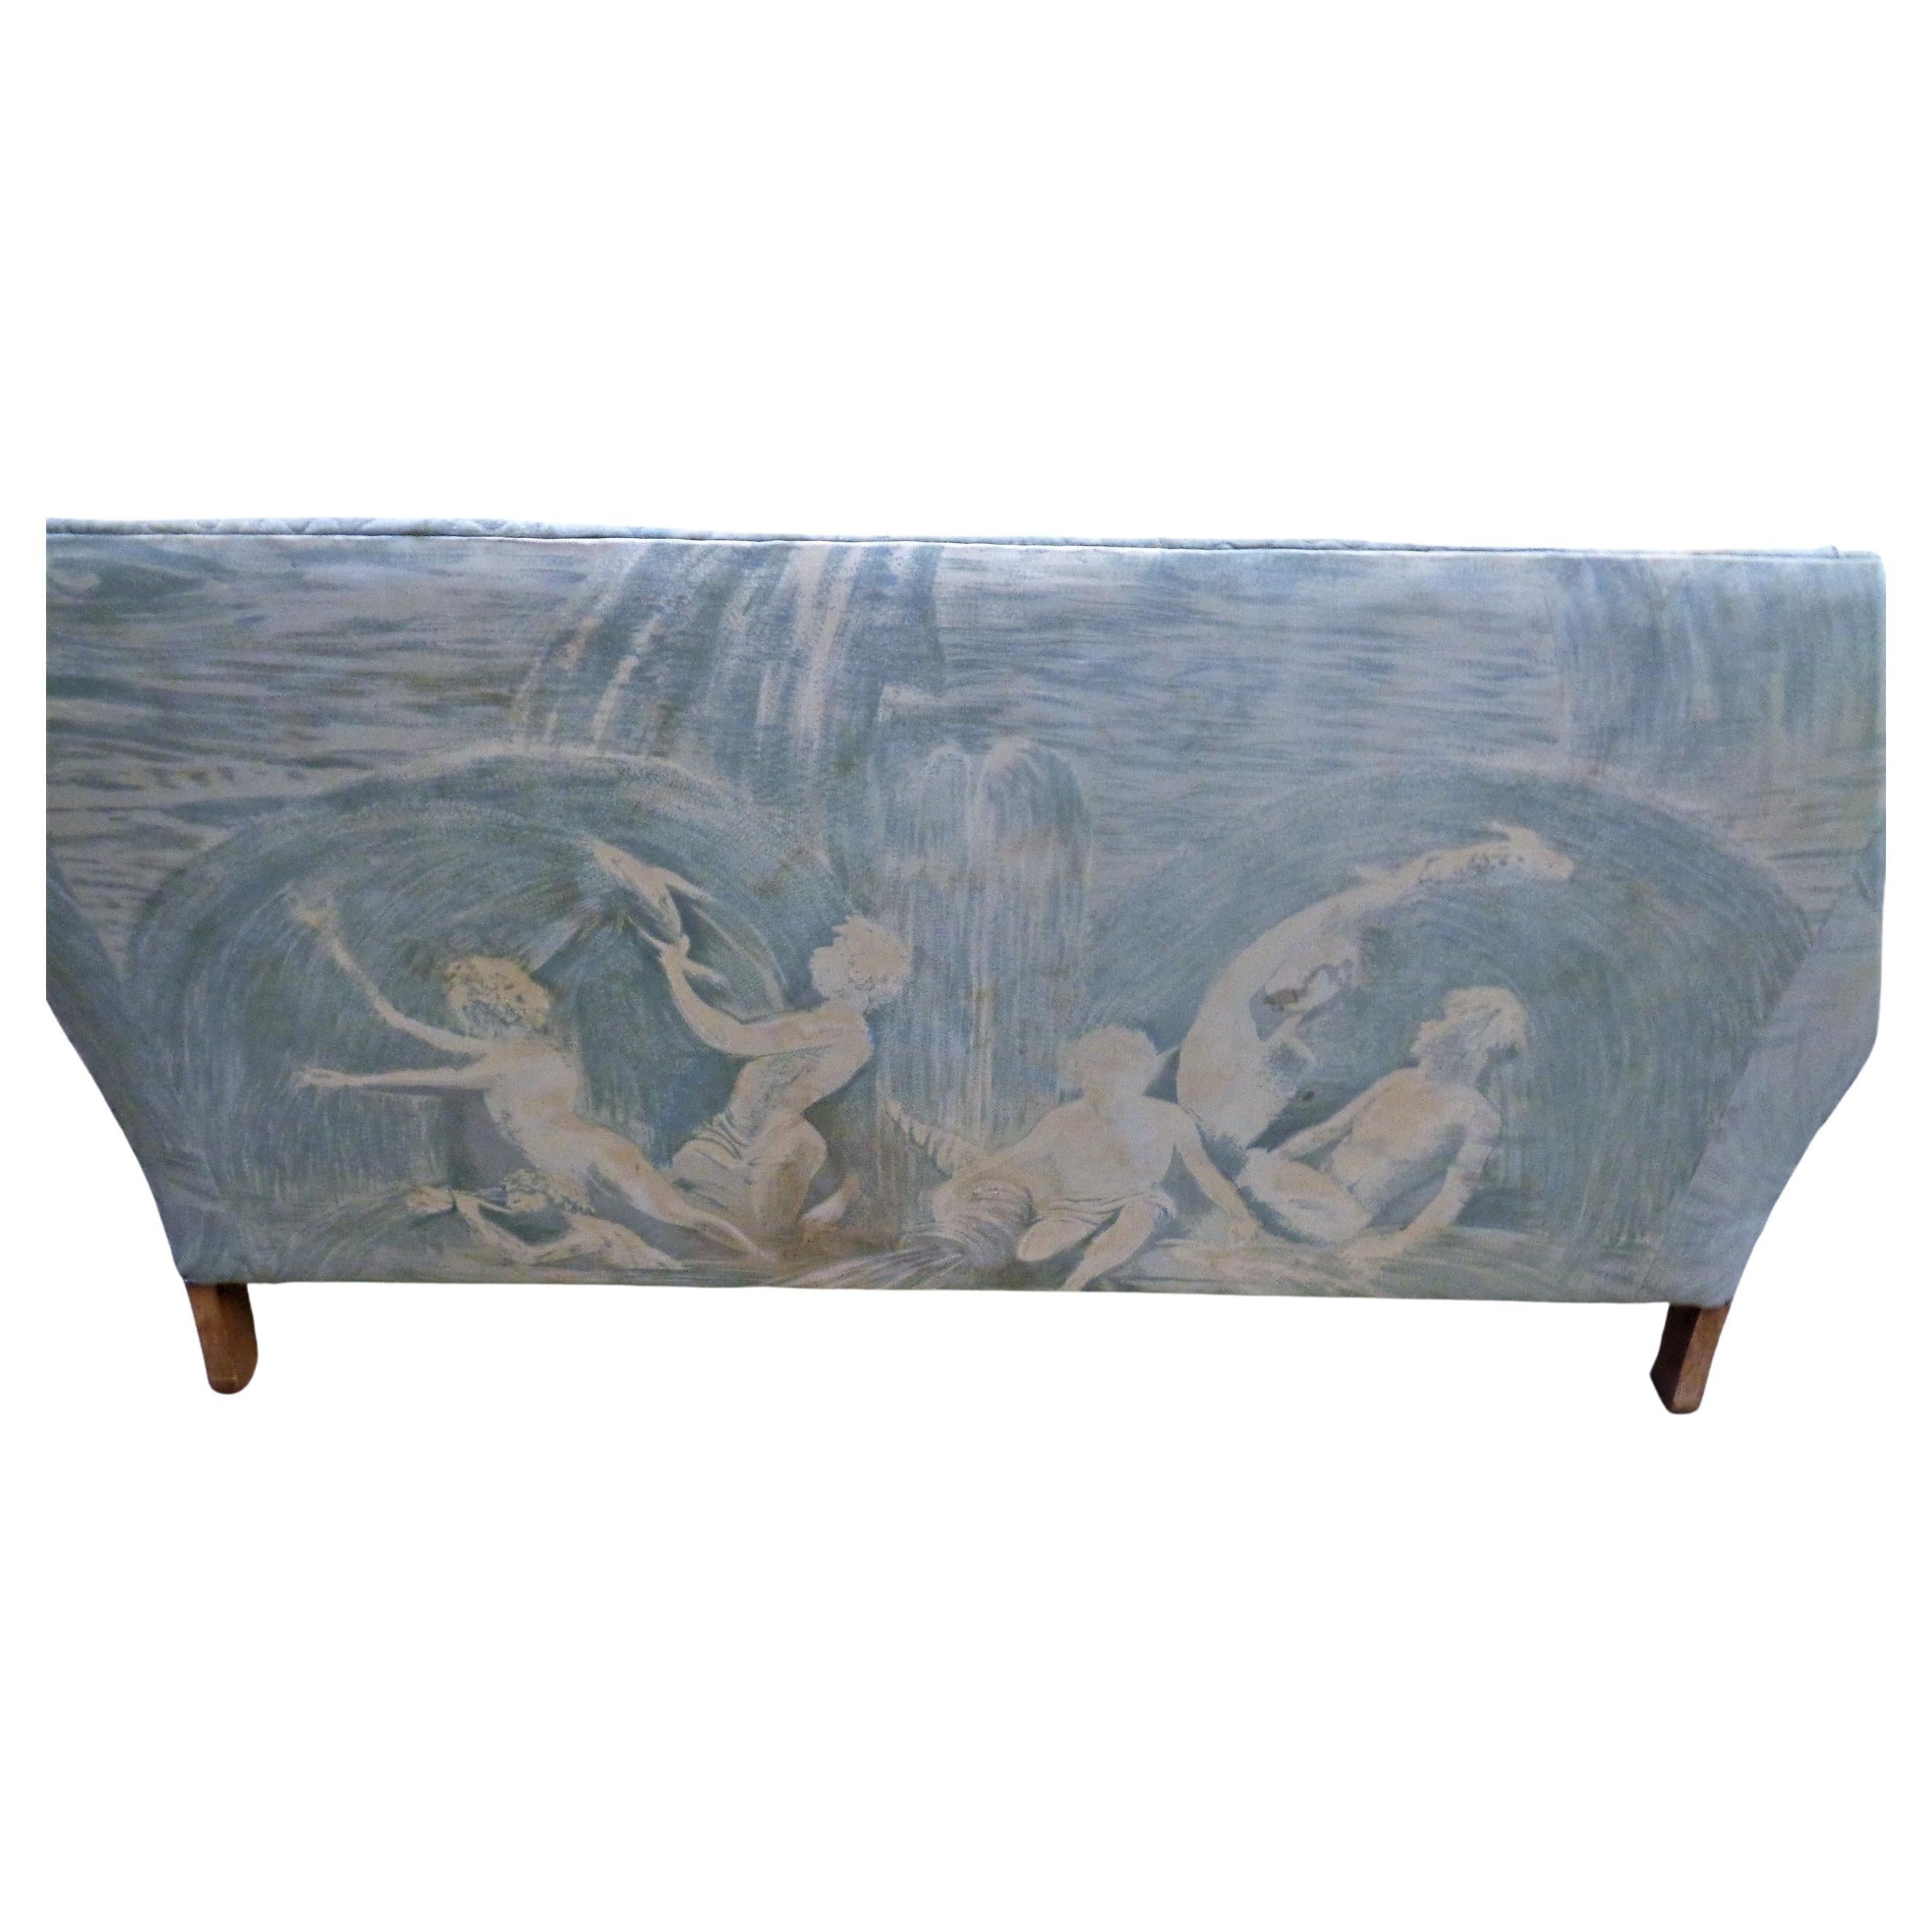 Hollywood Regency Tuxedo Loveseat Exotic Upholstery Mythological Fauns Seascape  In Fair Condition For Sale In Rochester, NY